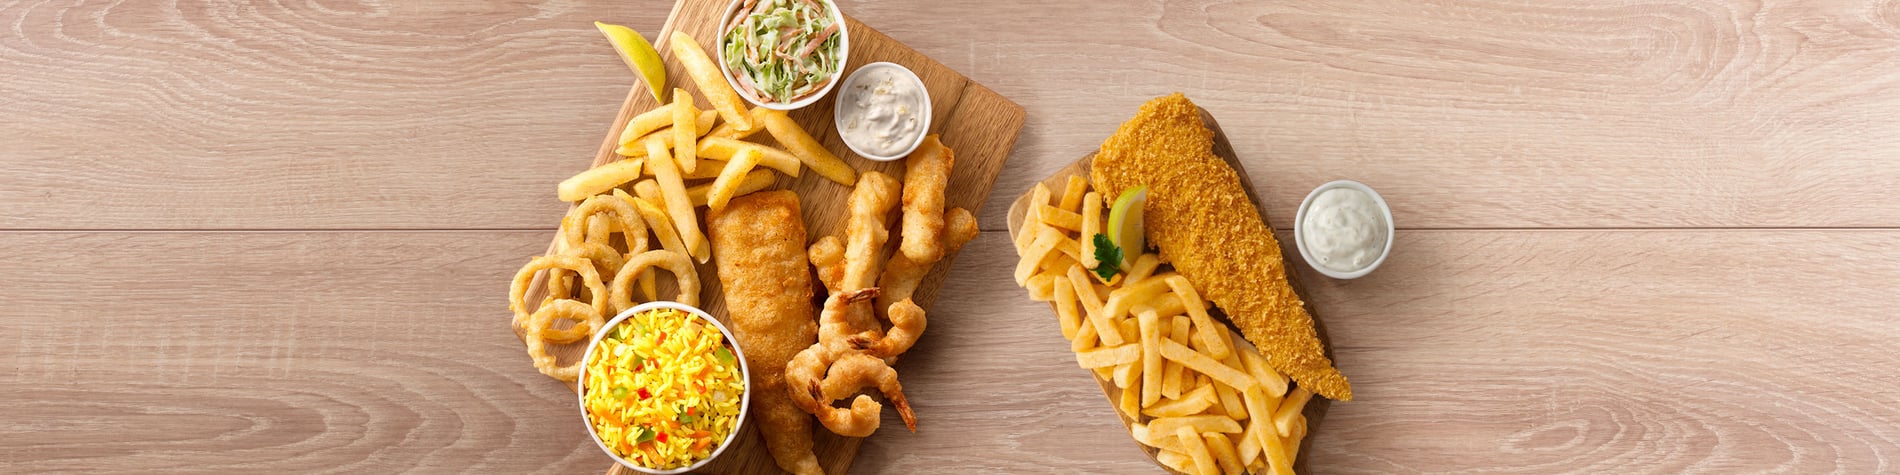 Seafood meals from Fishaways Northmead Square including a Crunchy Fish and Chips meal and a seafood Platter for One with hake, calamari, prawns, chips, onion rings, and coleslaw.